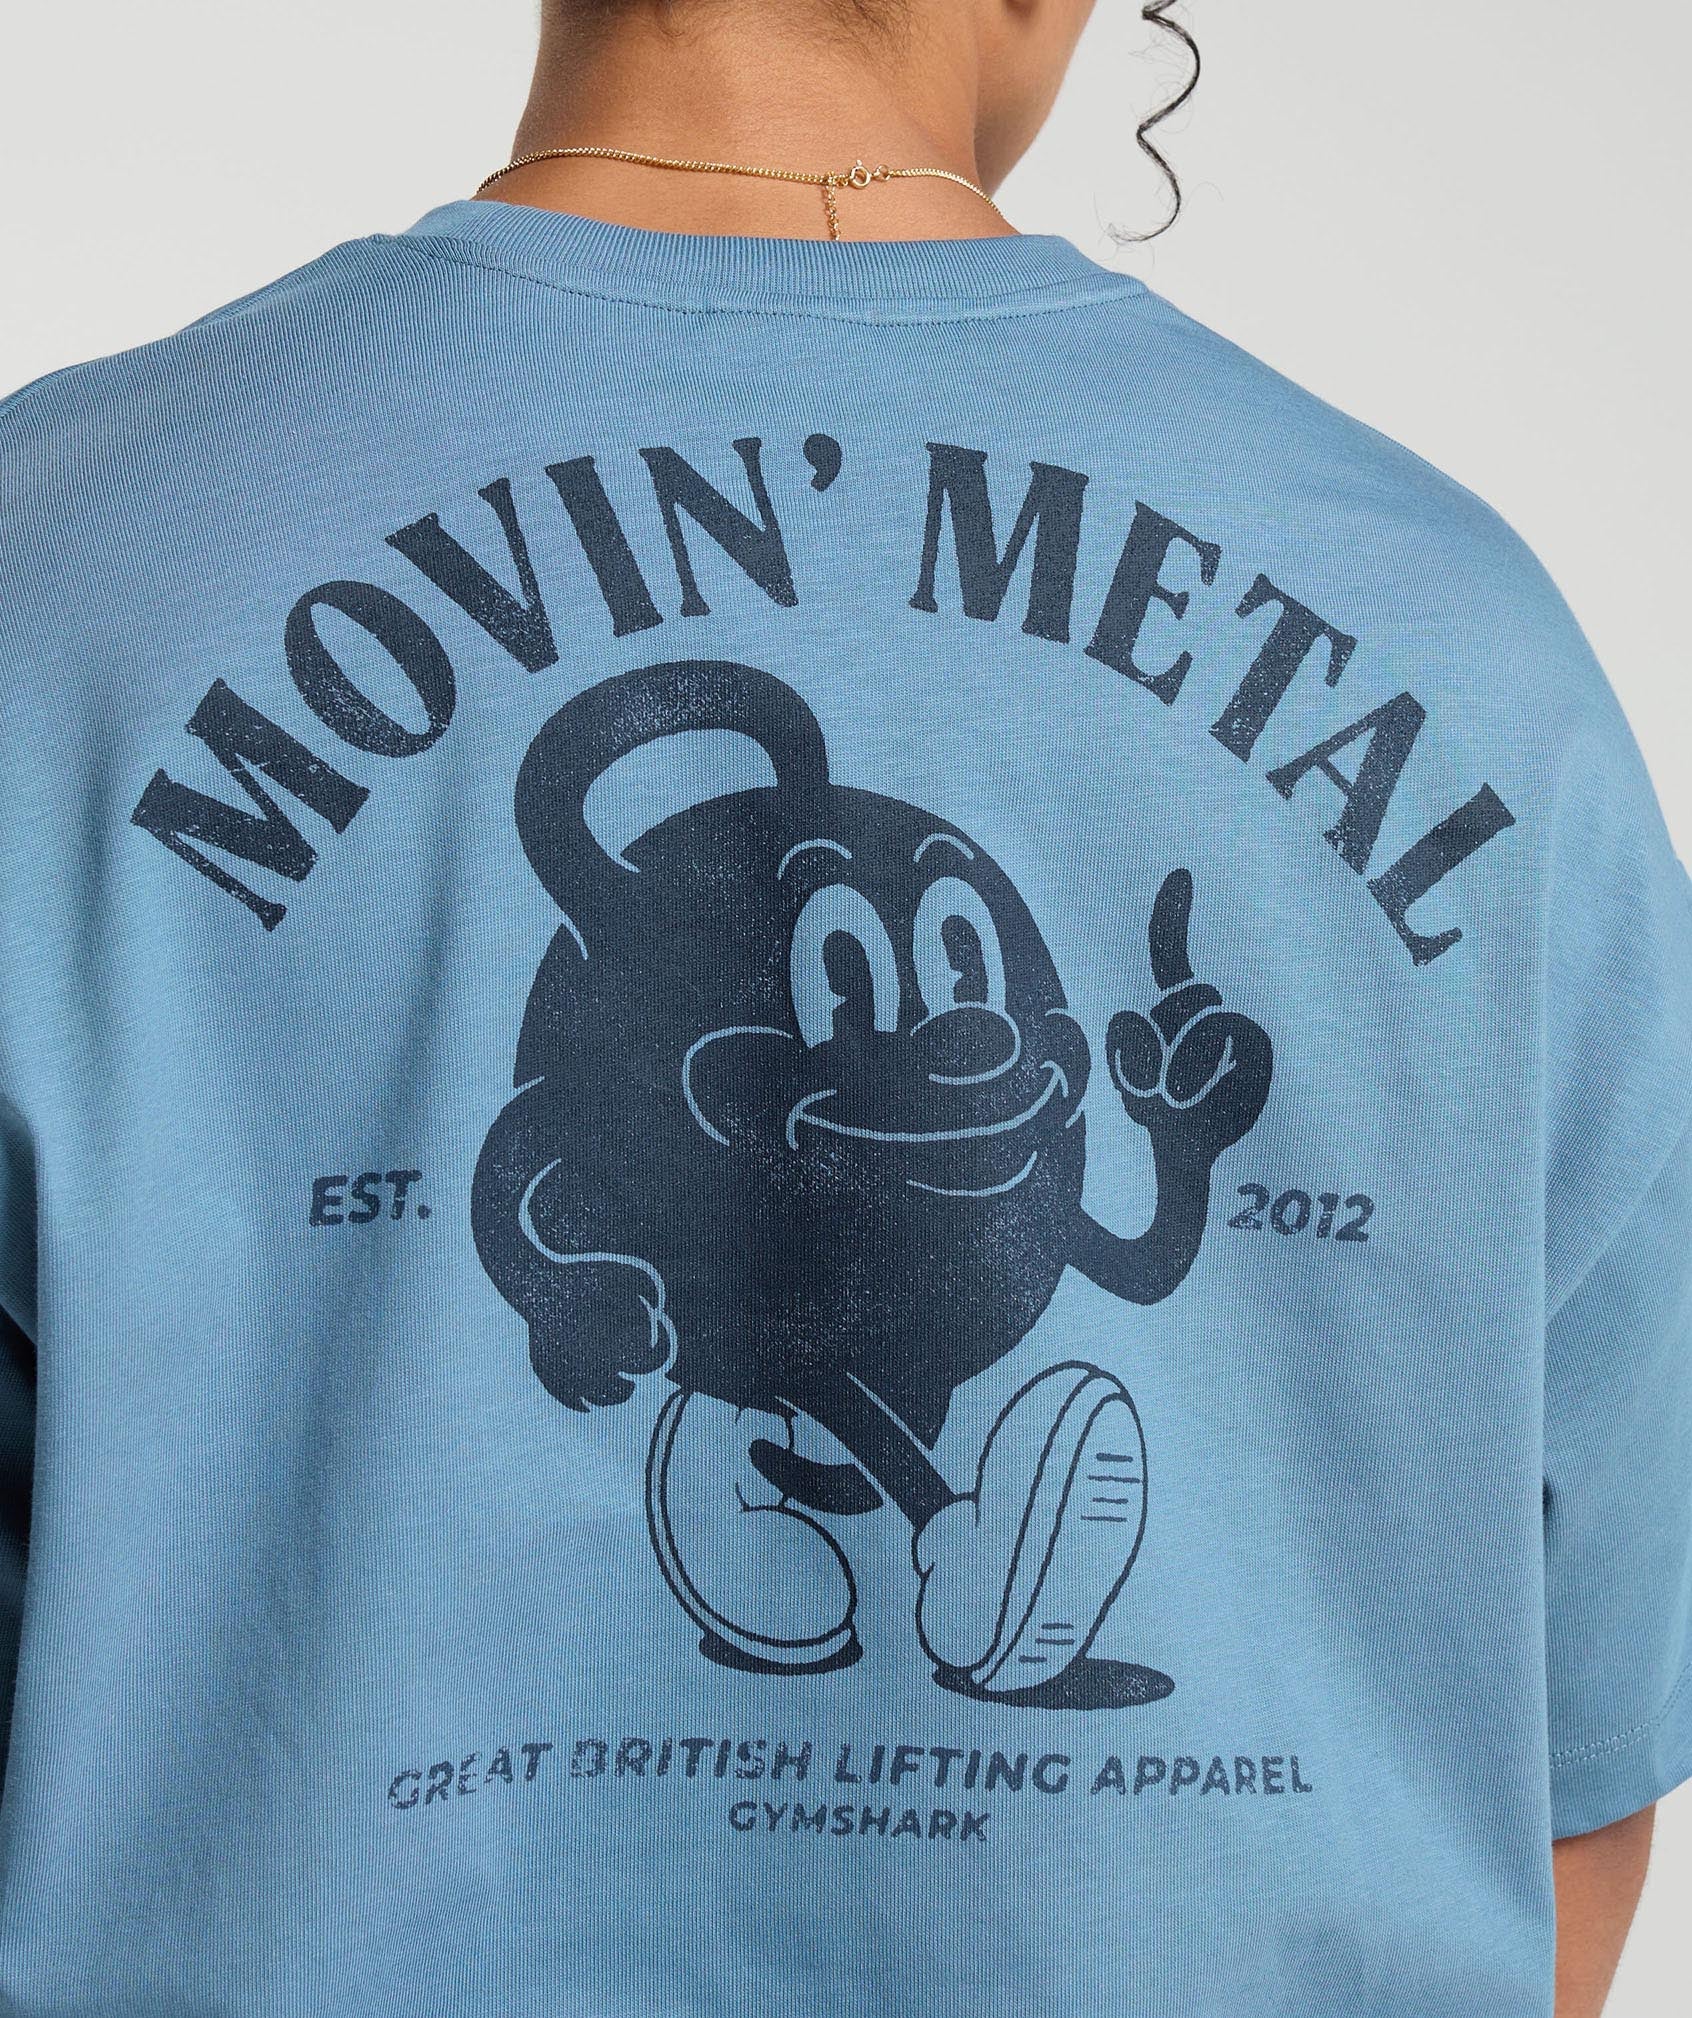 Movin' Metal T-Shirt in Faded Blue - view 5